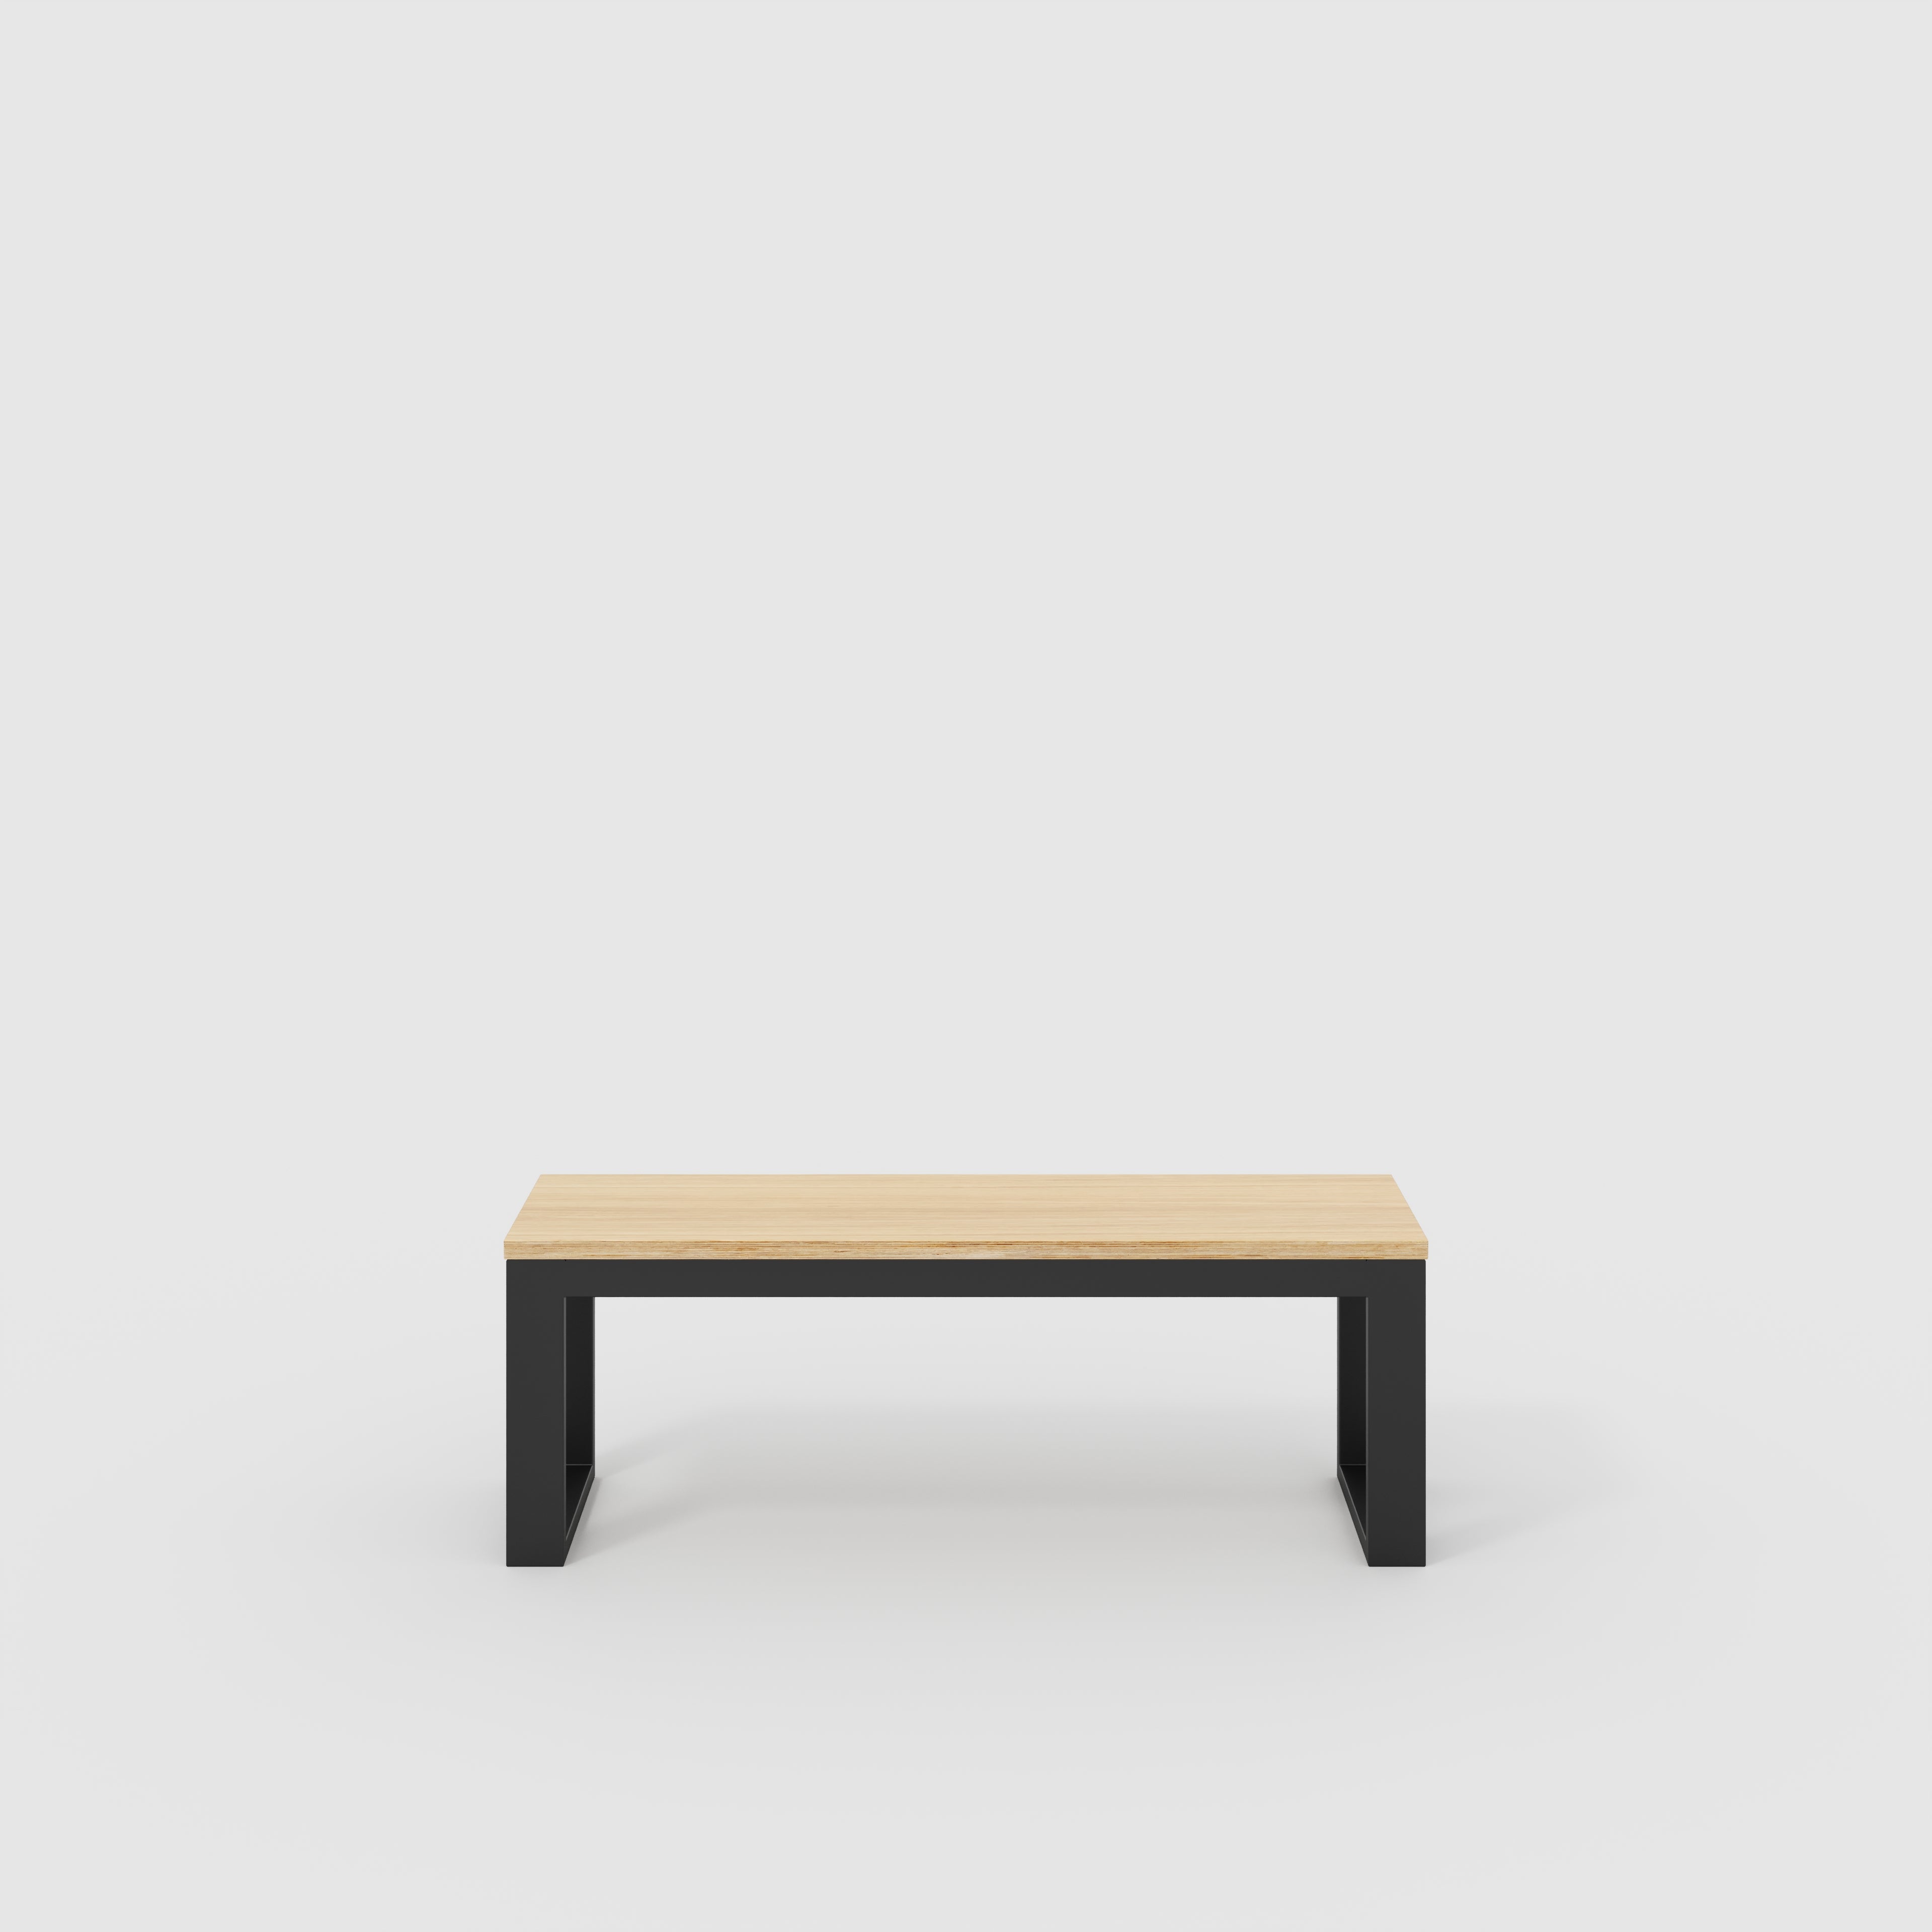 Bench Seat with Black Industrial Frame - Plywood Oak - 1200(w) x 325(d)